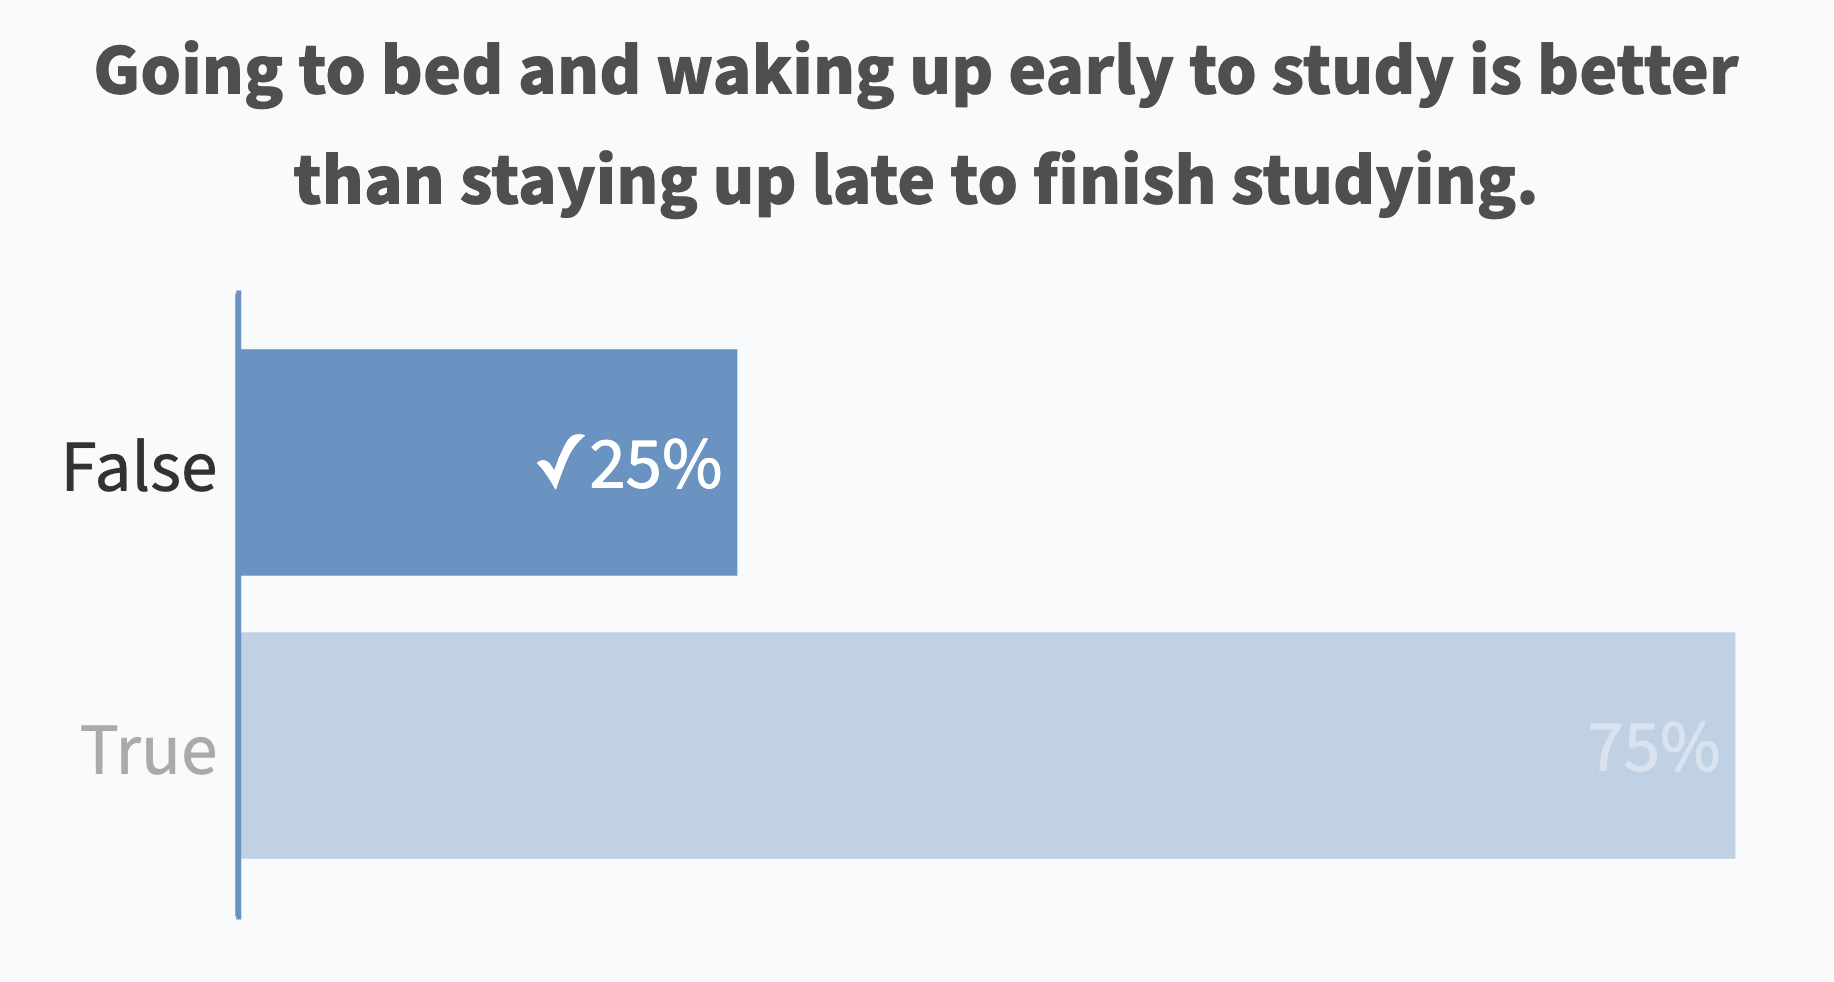 Going to bed and waking up early to study is better than staying up late to finish studying. (False: 25% correct)